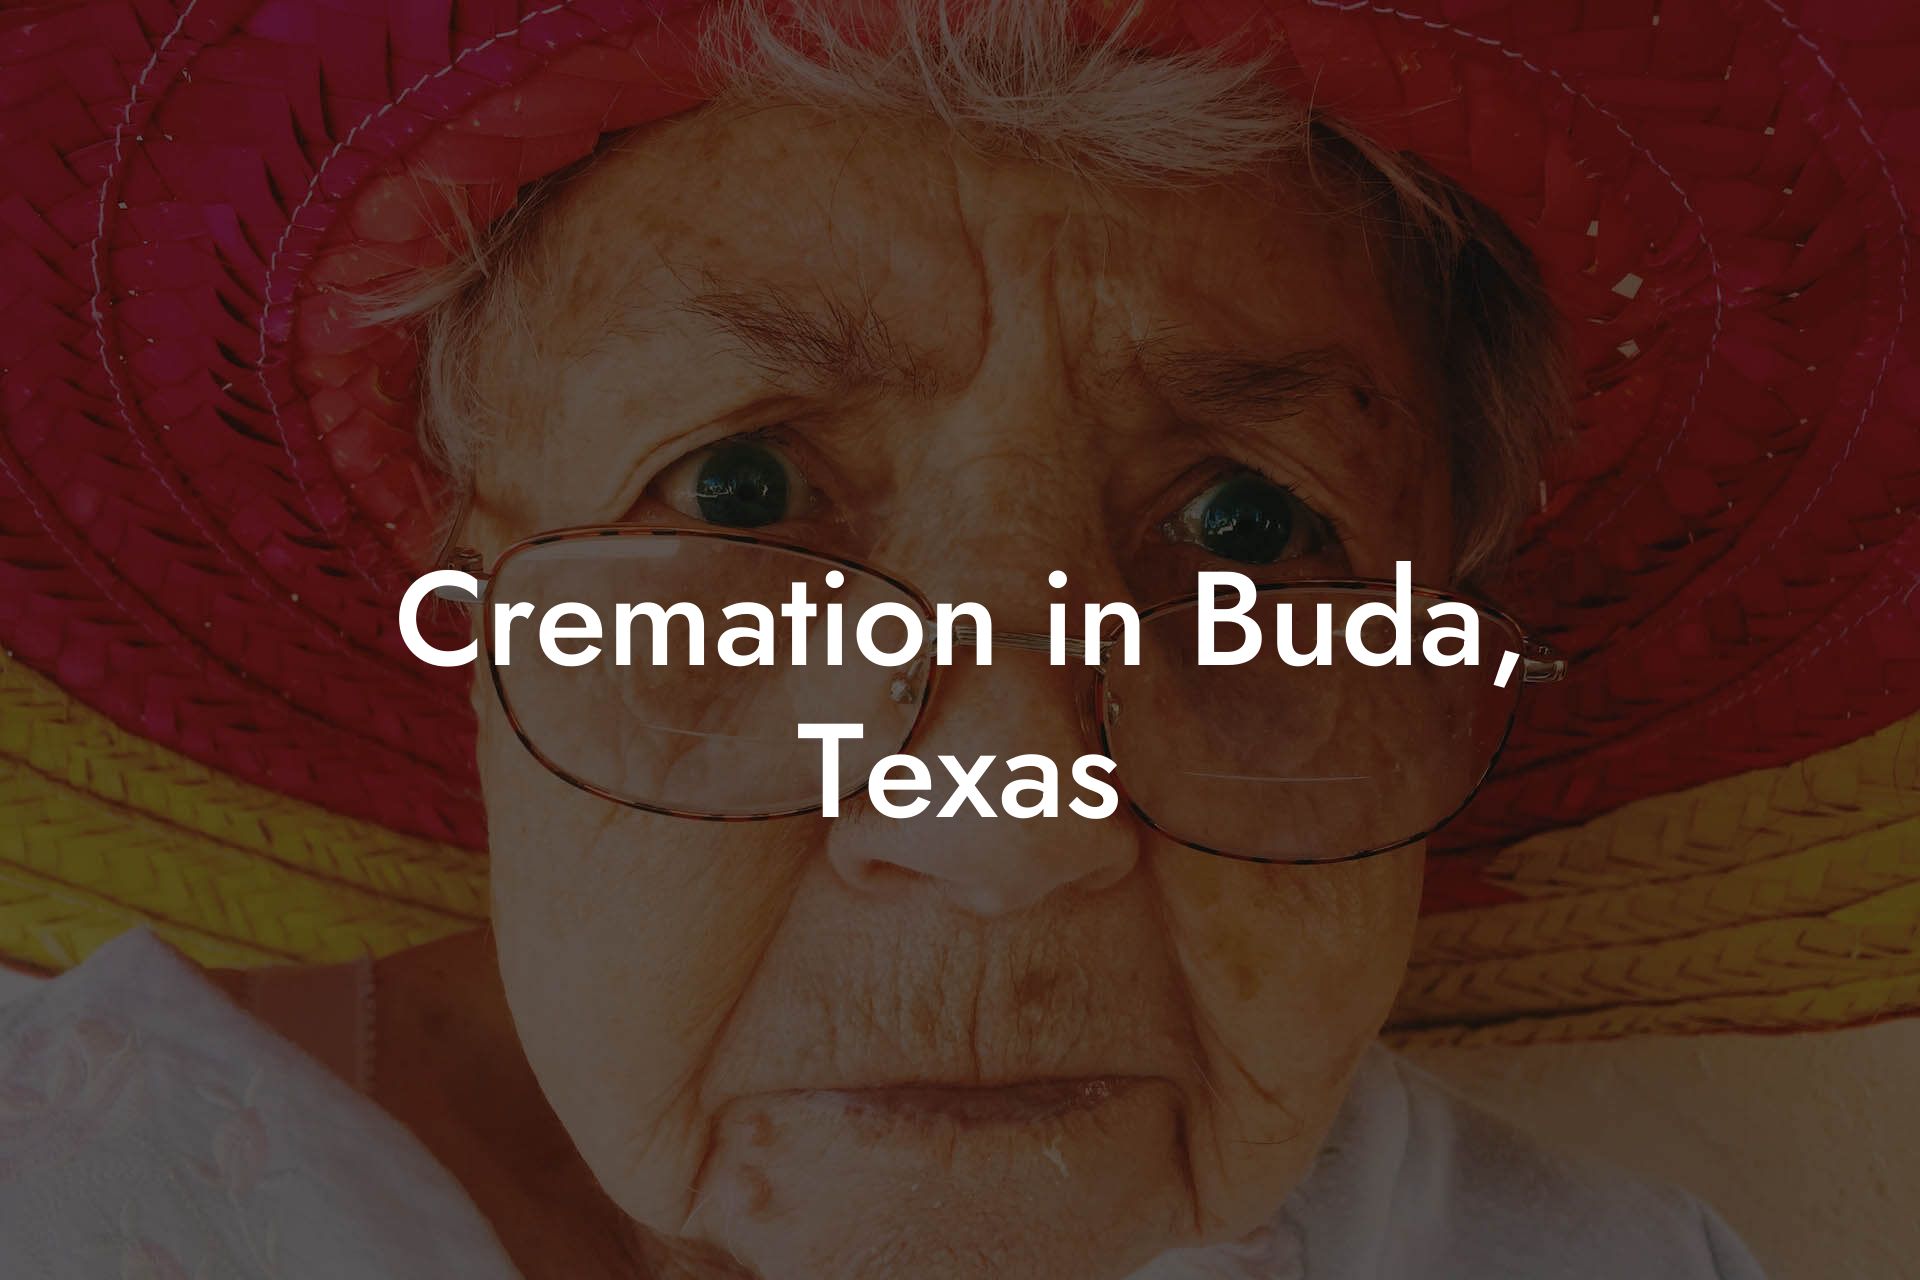 Cremation in Buda, Texas